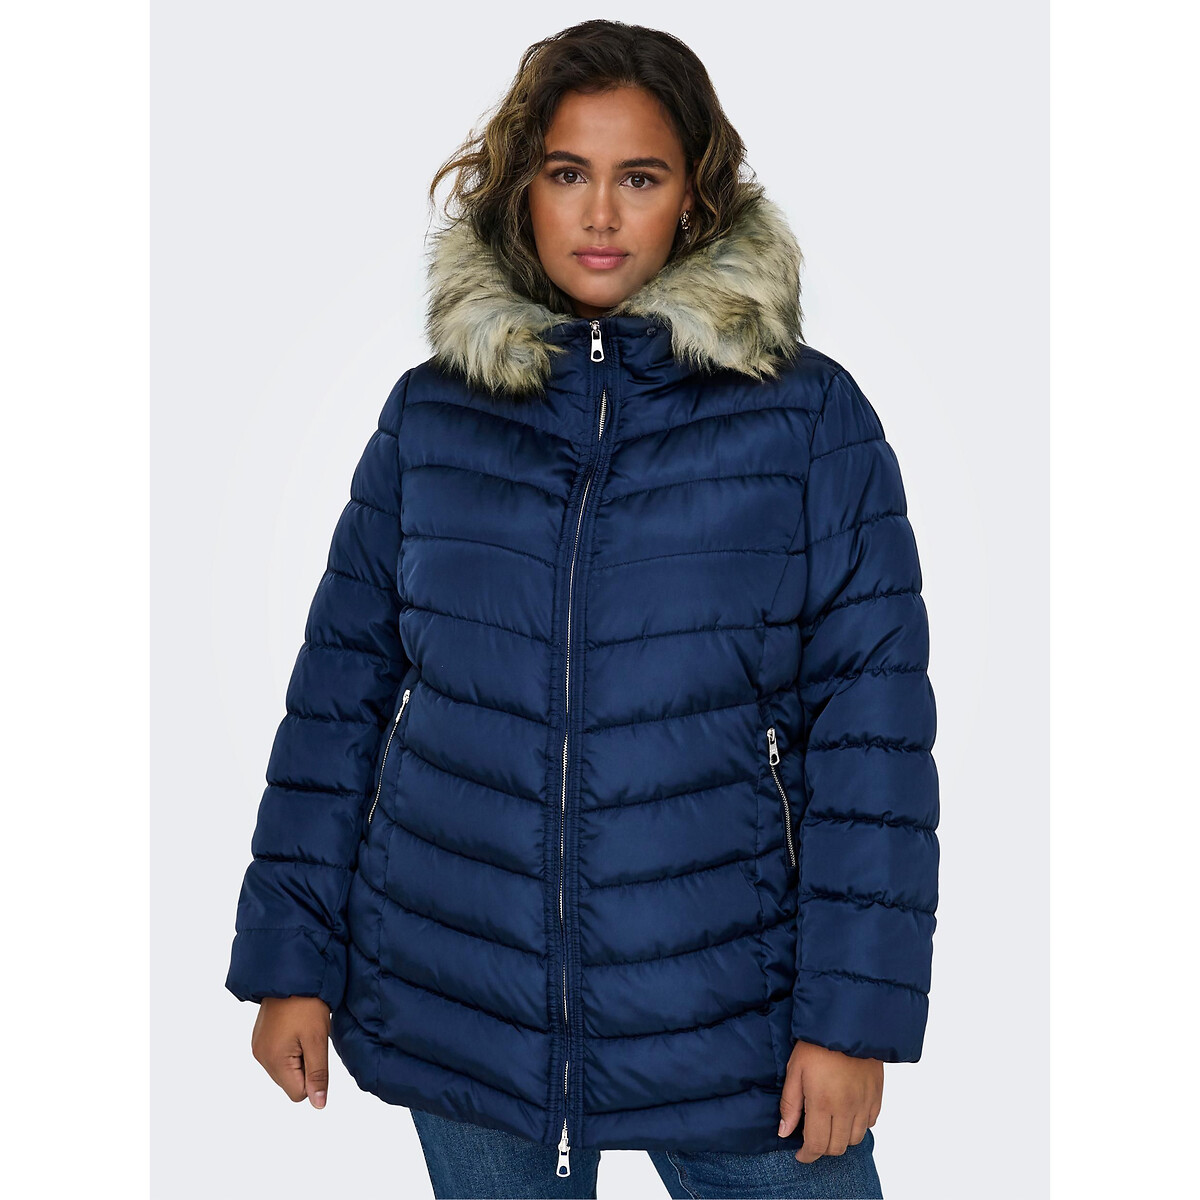 Hooded Quilted Padded Jacket with Faux Fur Trim